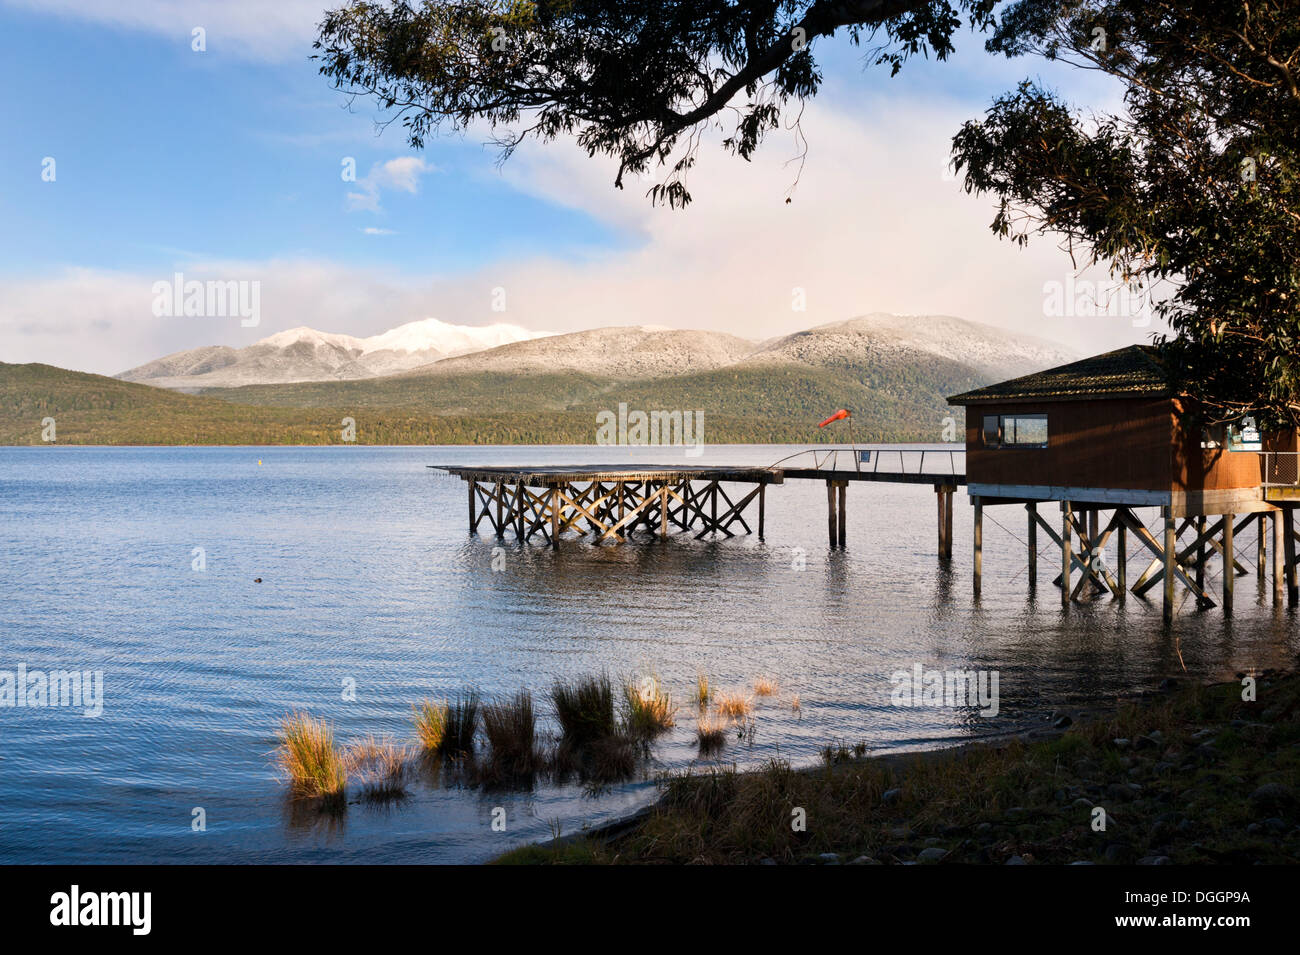 Lake Manapouri at the small town of Te Anau, New Zealand. The town serves as a gateway to Fiordland National Park. Stock Photo